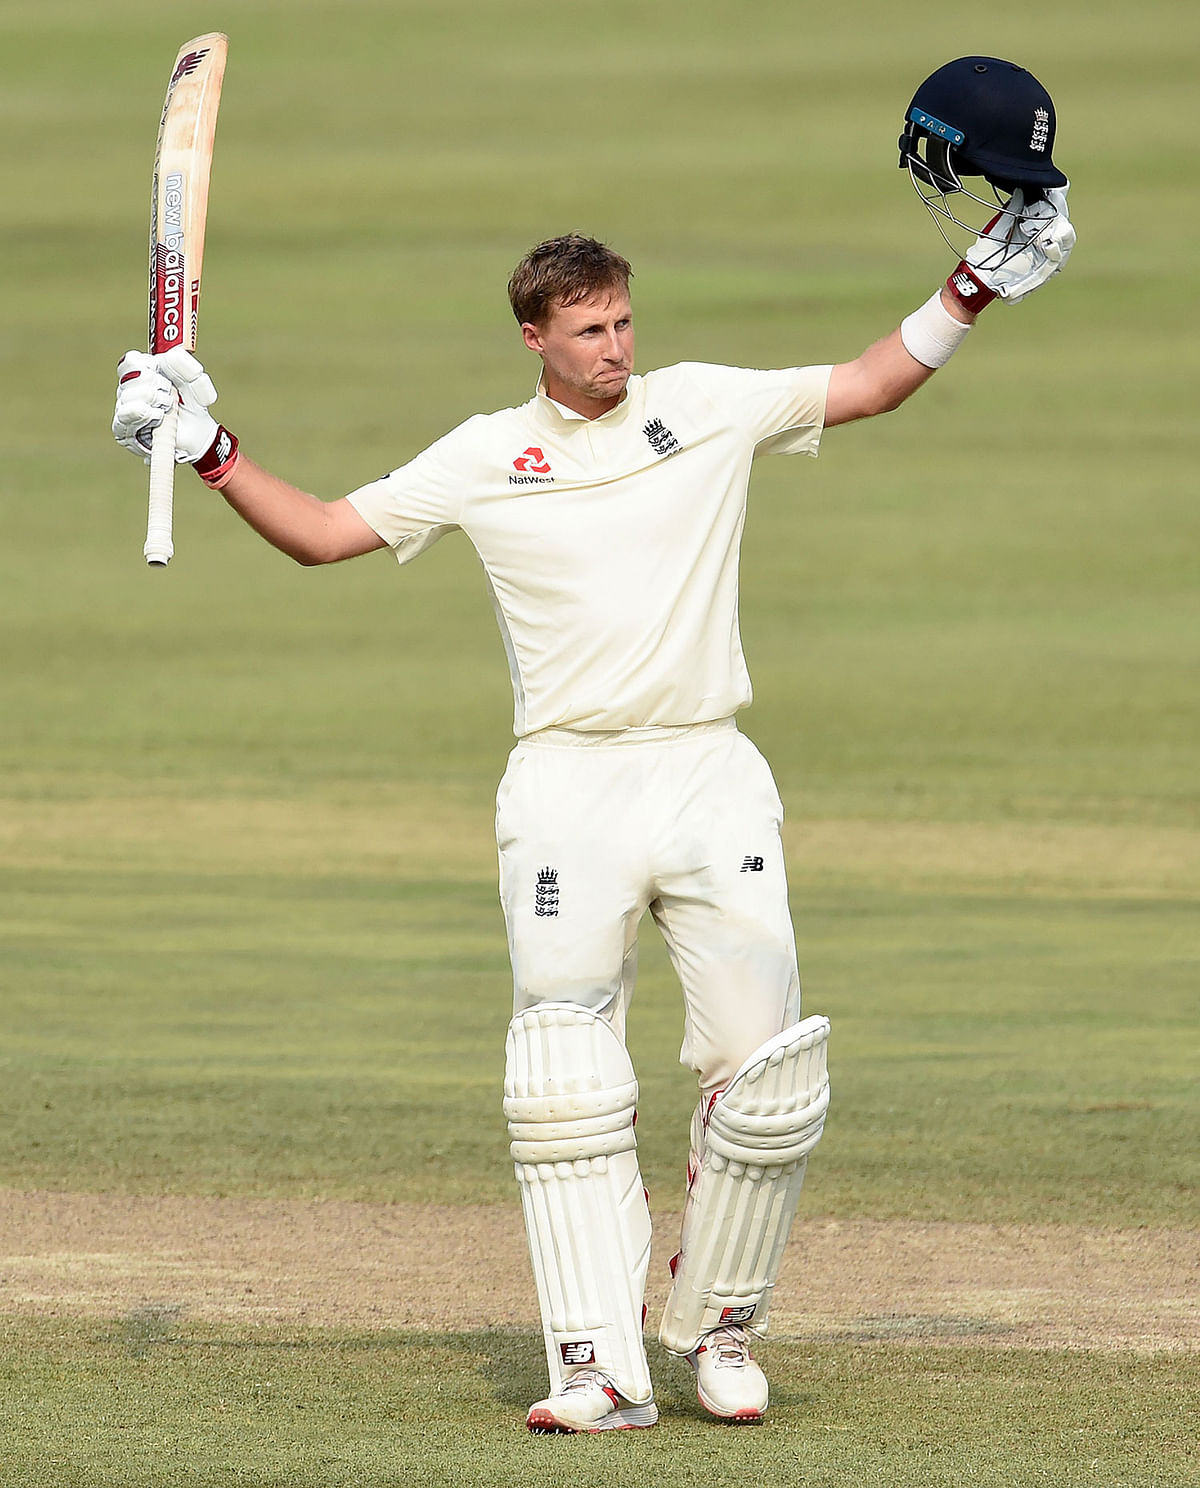 England’s captain Joe Root raises his bat and helmet in celebration after scoring a century (100 runs) during the third day of the second Test match between Sri Lanka and England at the Pallekele International Cricket Stadium in Kandy on 16 November, 2018. Photo: AFP